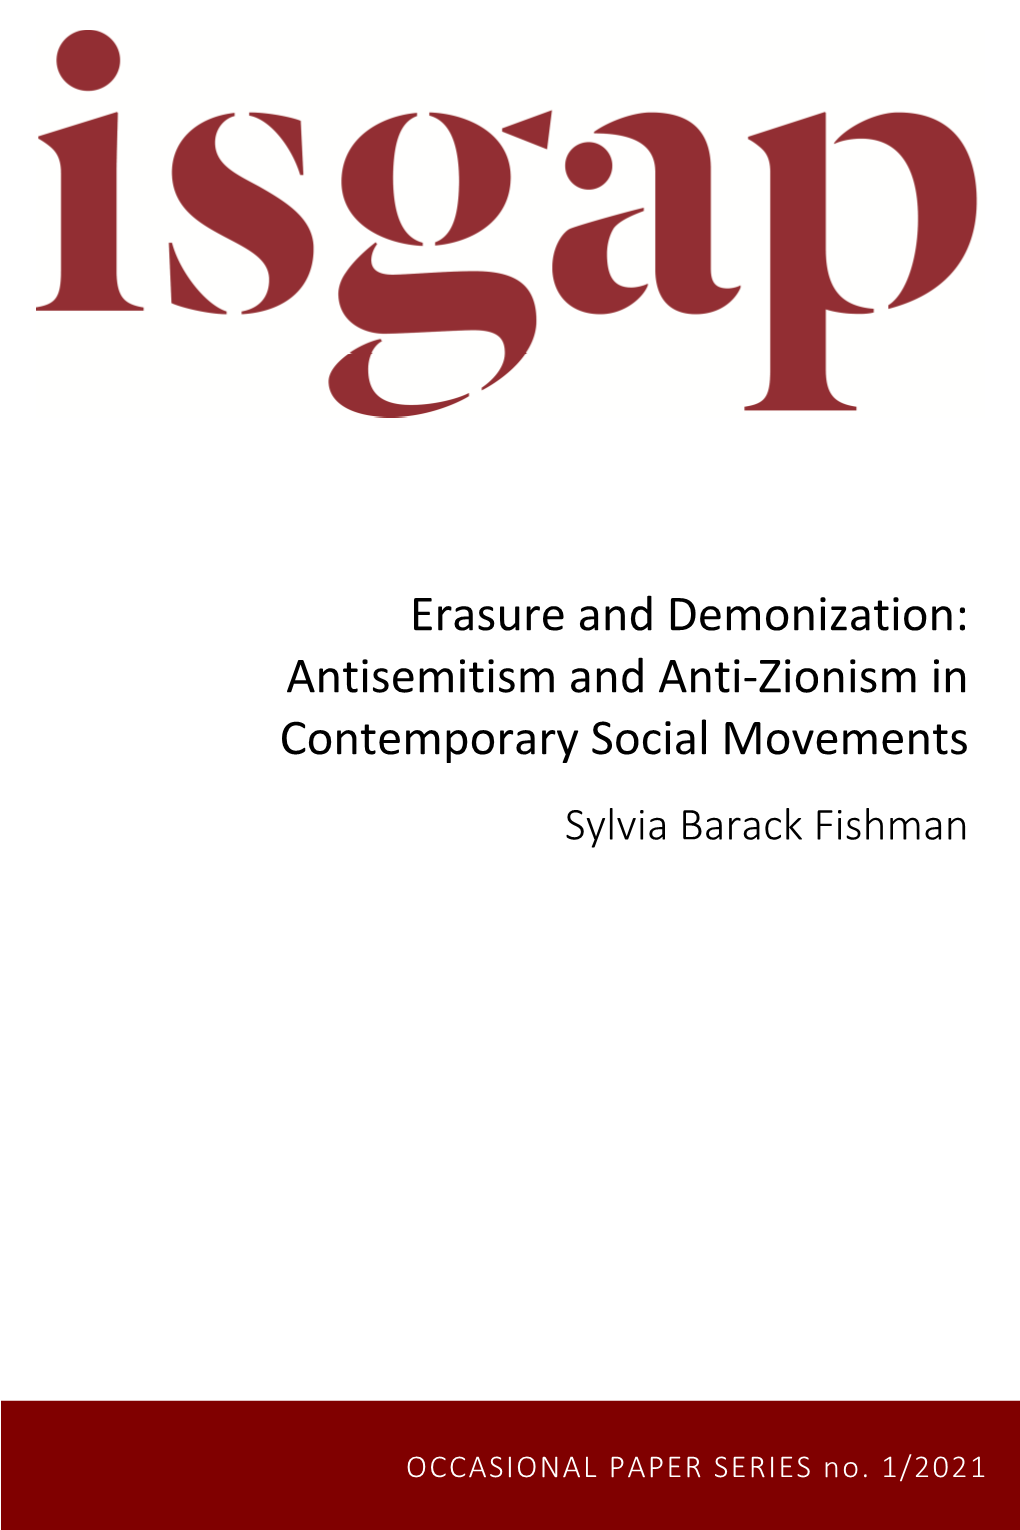 Erasure and Demonization: Antisemitism and Anti-Zionism in Contemporary Social Movements